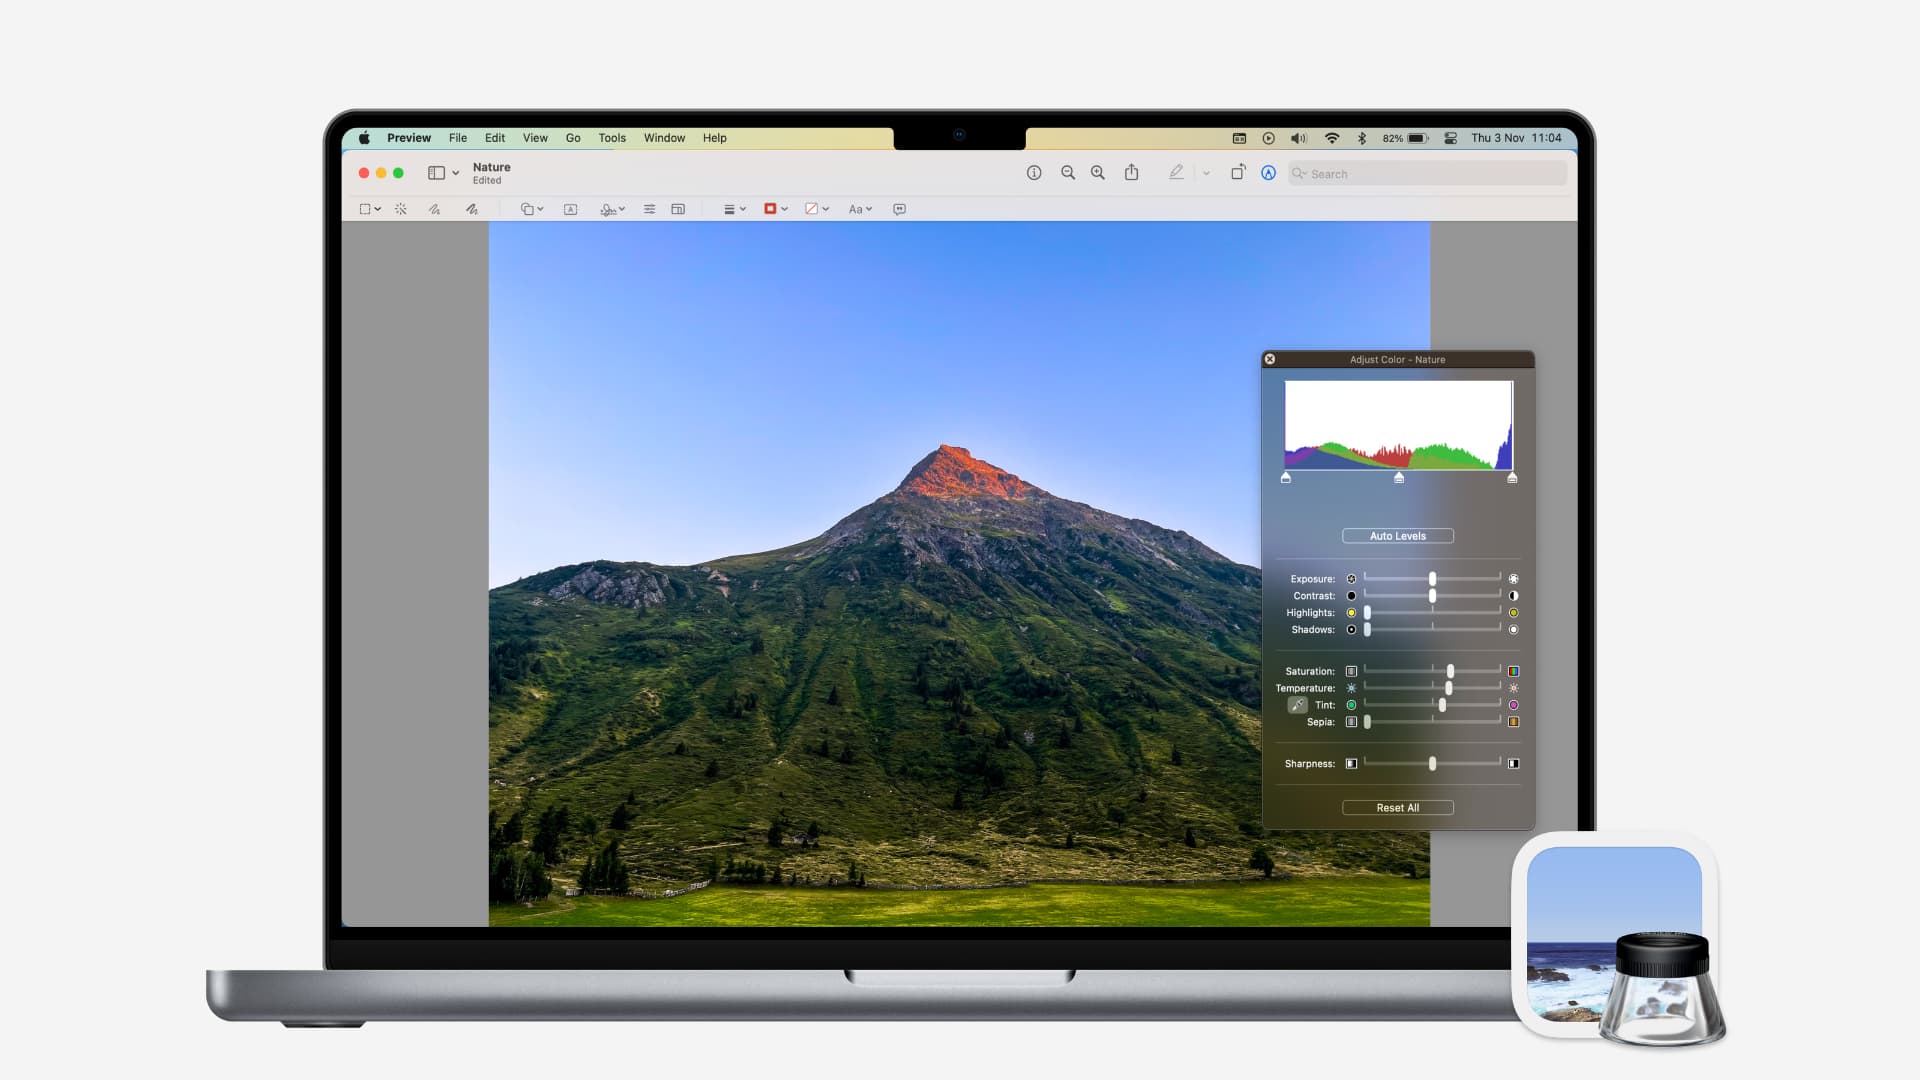 Image editing tools in Preview on Mac